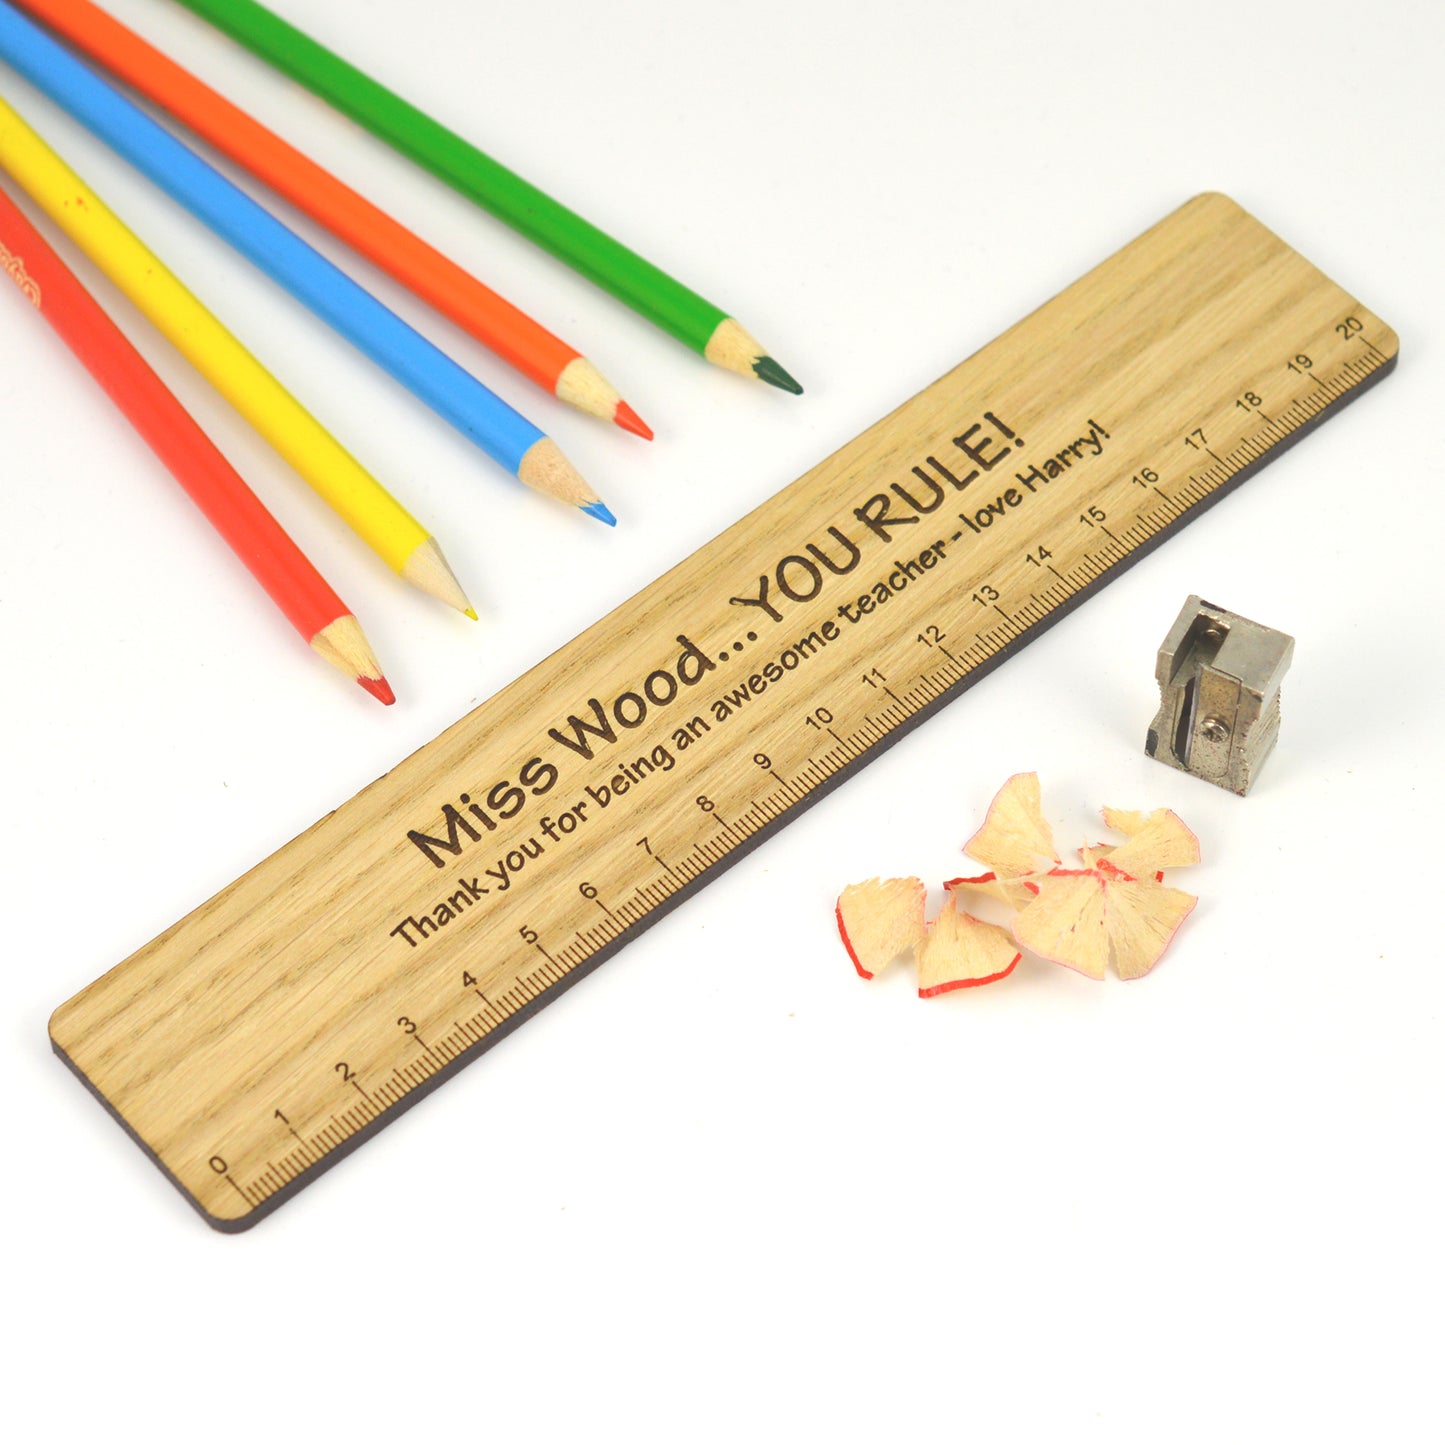 Personalised Wooden Thank You Ruler For Teacher - End Of Term "You Rule" Engraved Teacher Appreciation Present